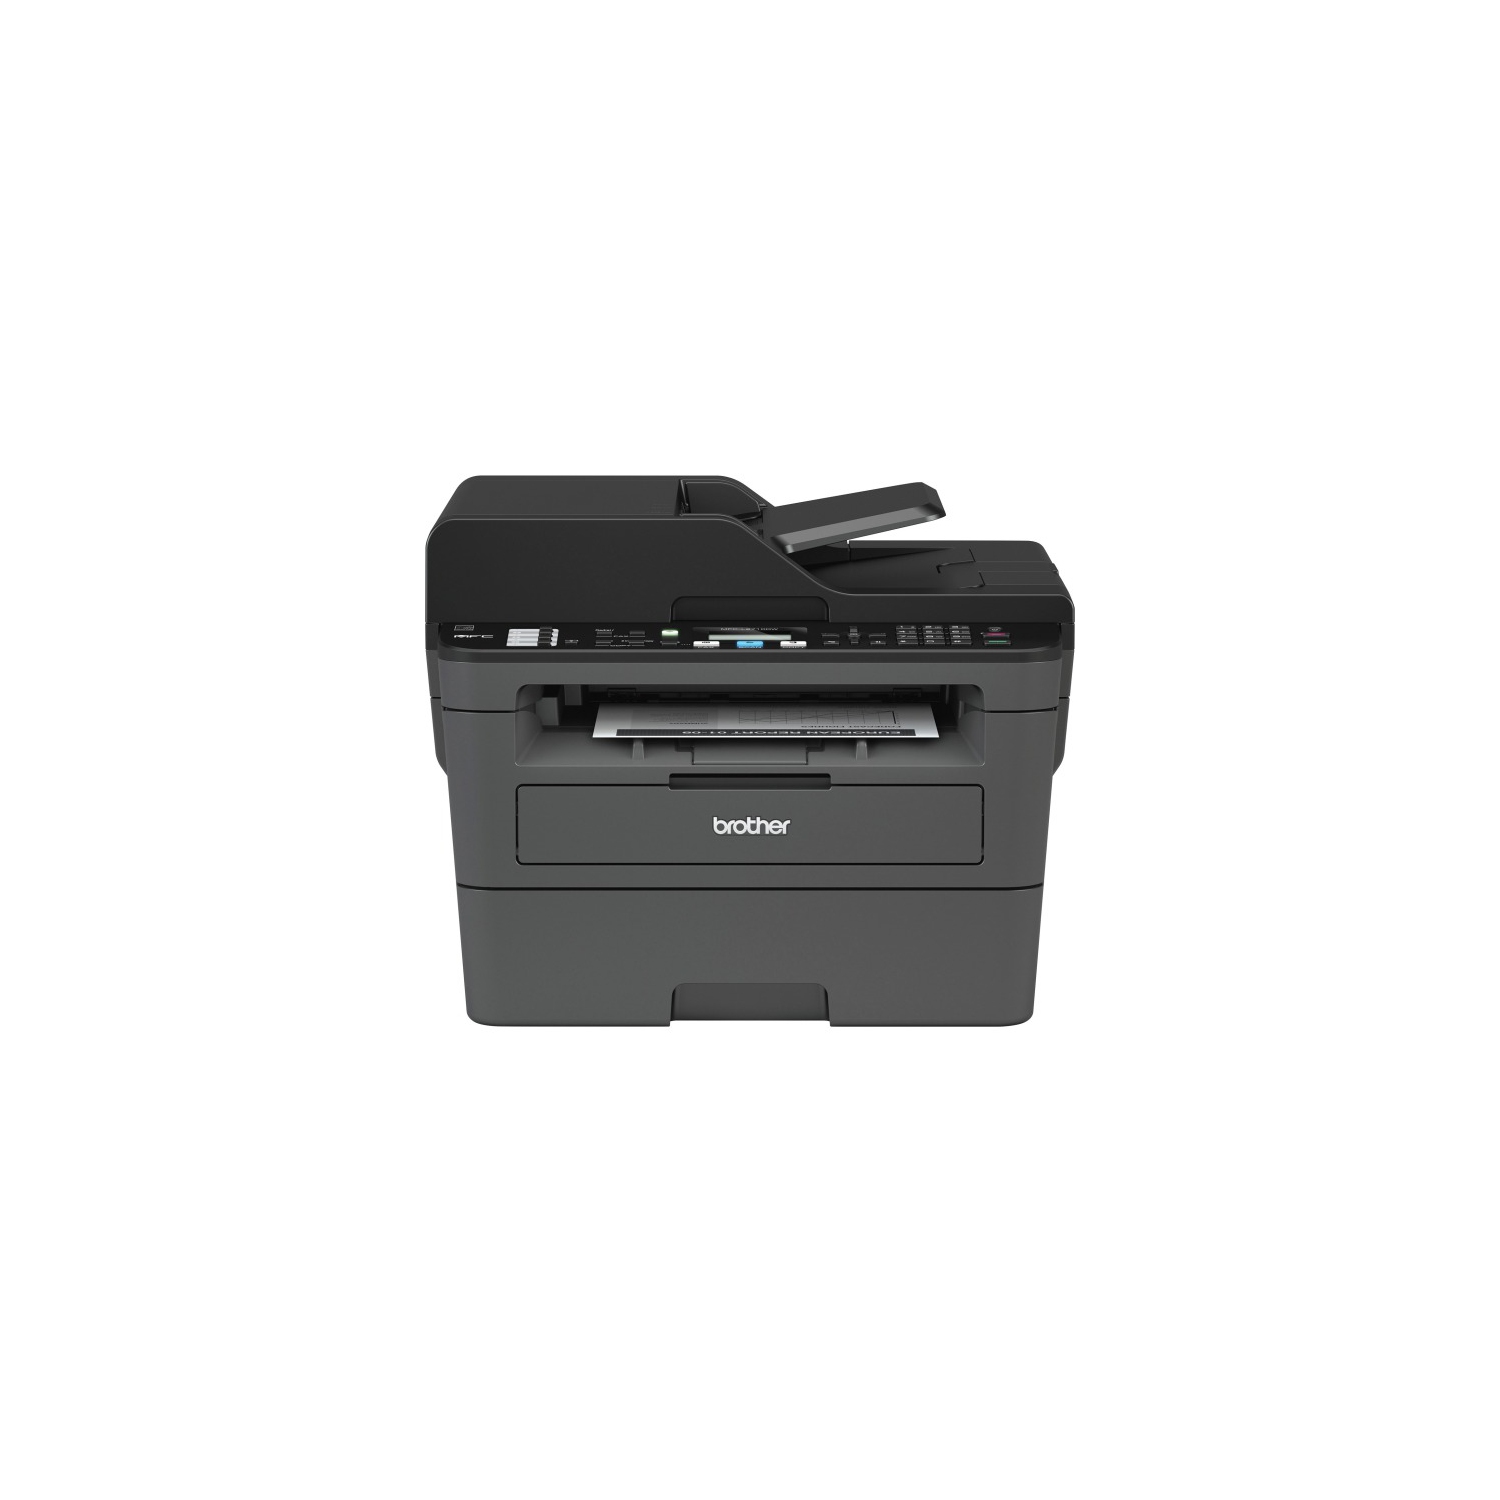 Brother MFC-L2710DW Compact Laser All-in-One with Duplex Printing with Wireless Networking